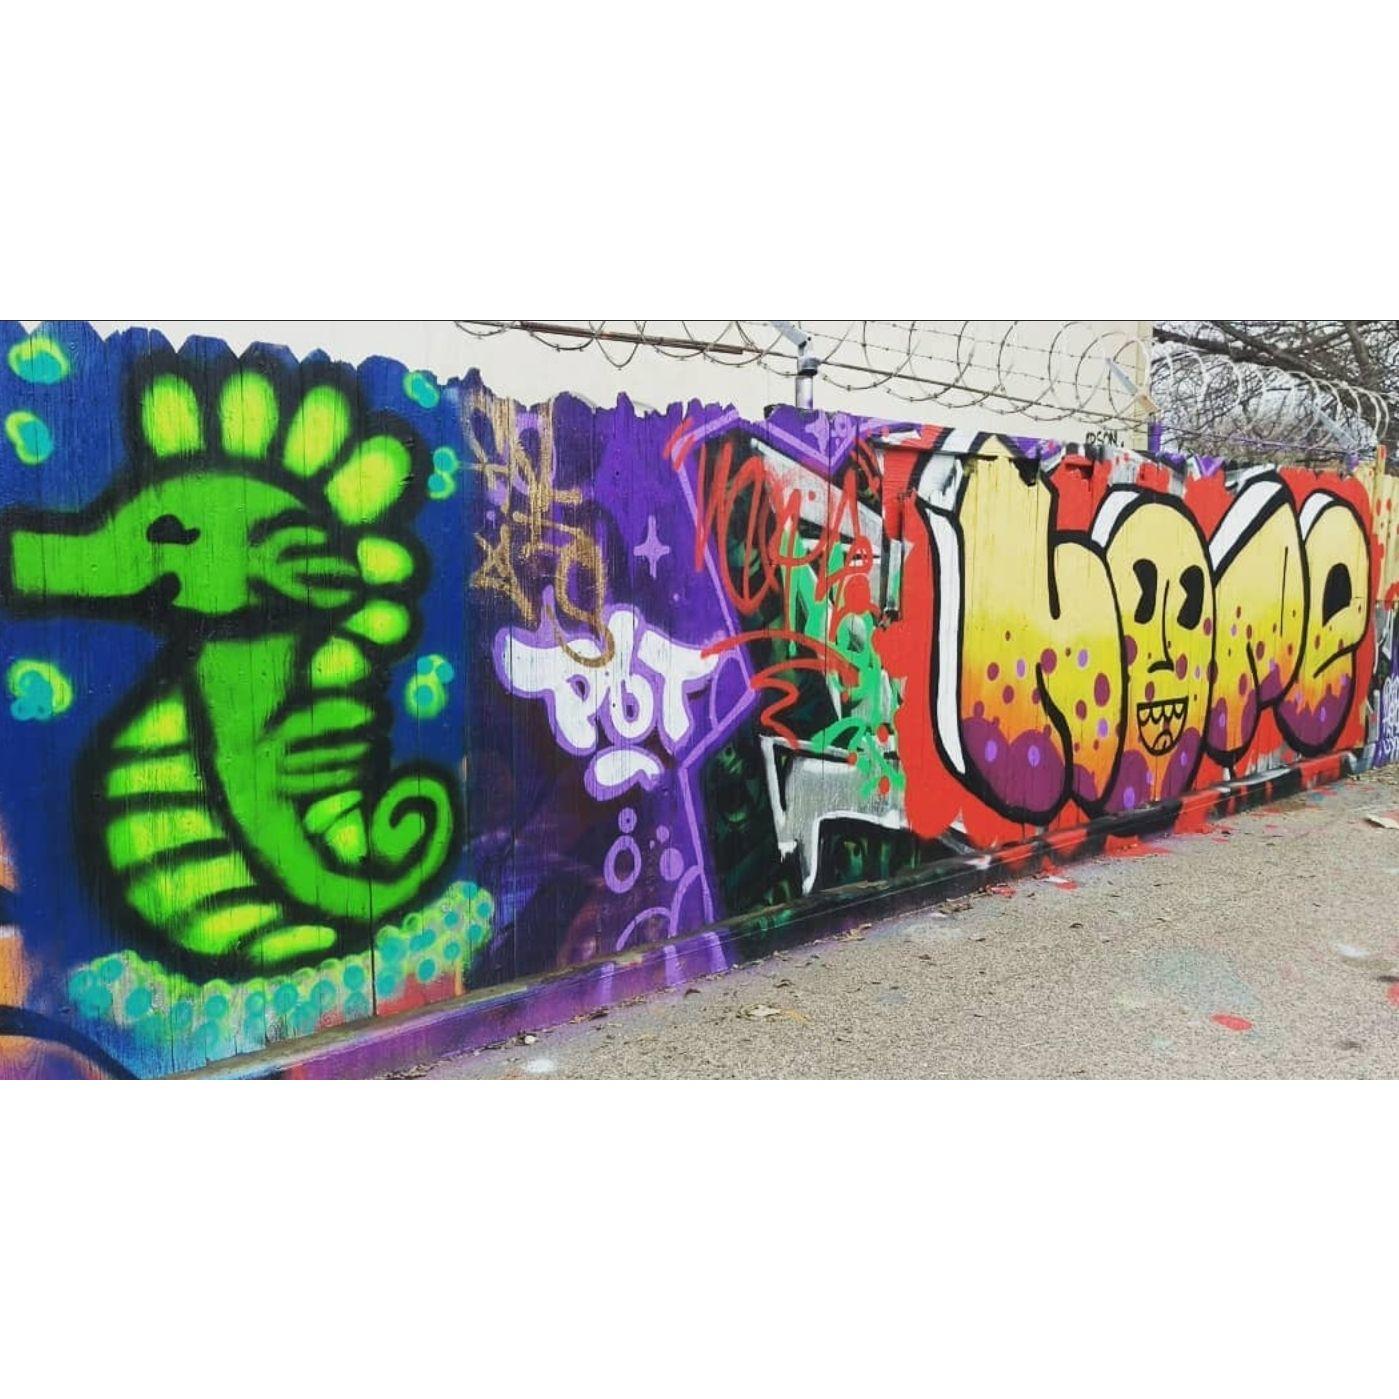 One of our first dates in Dallas Tx. To the spray paint park, Carries first time painting.